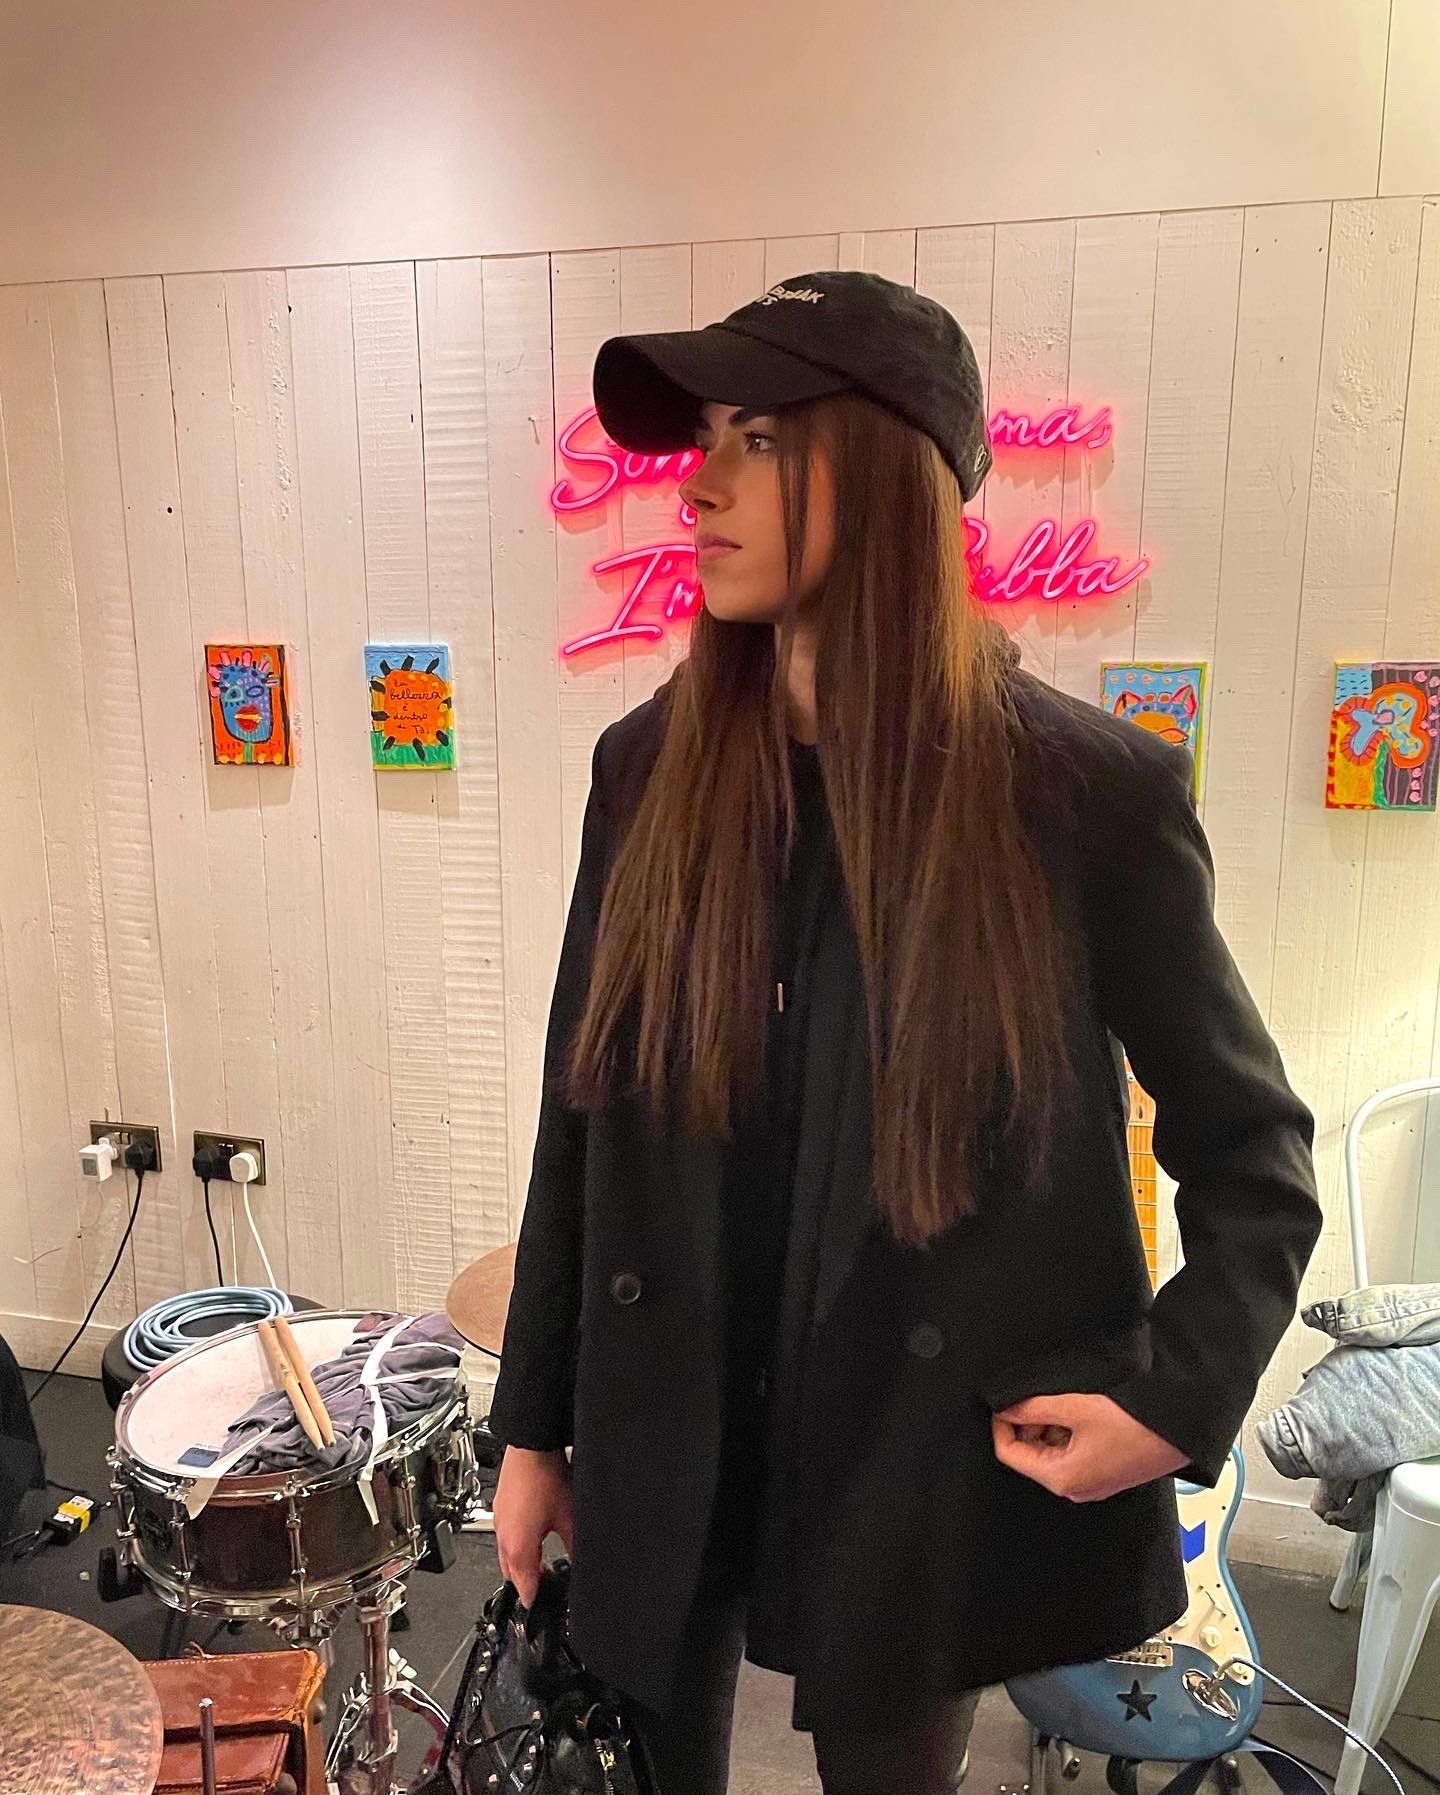 Stella standing in a black jacket with a black baseball cap in front of a wall covered in little painting. She is in front of a pink neon sign that we are unable to read. There is a drum with drumsticks in the photograph to her left.